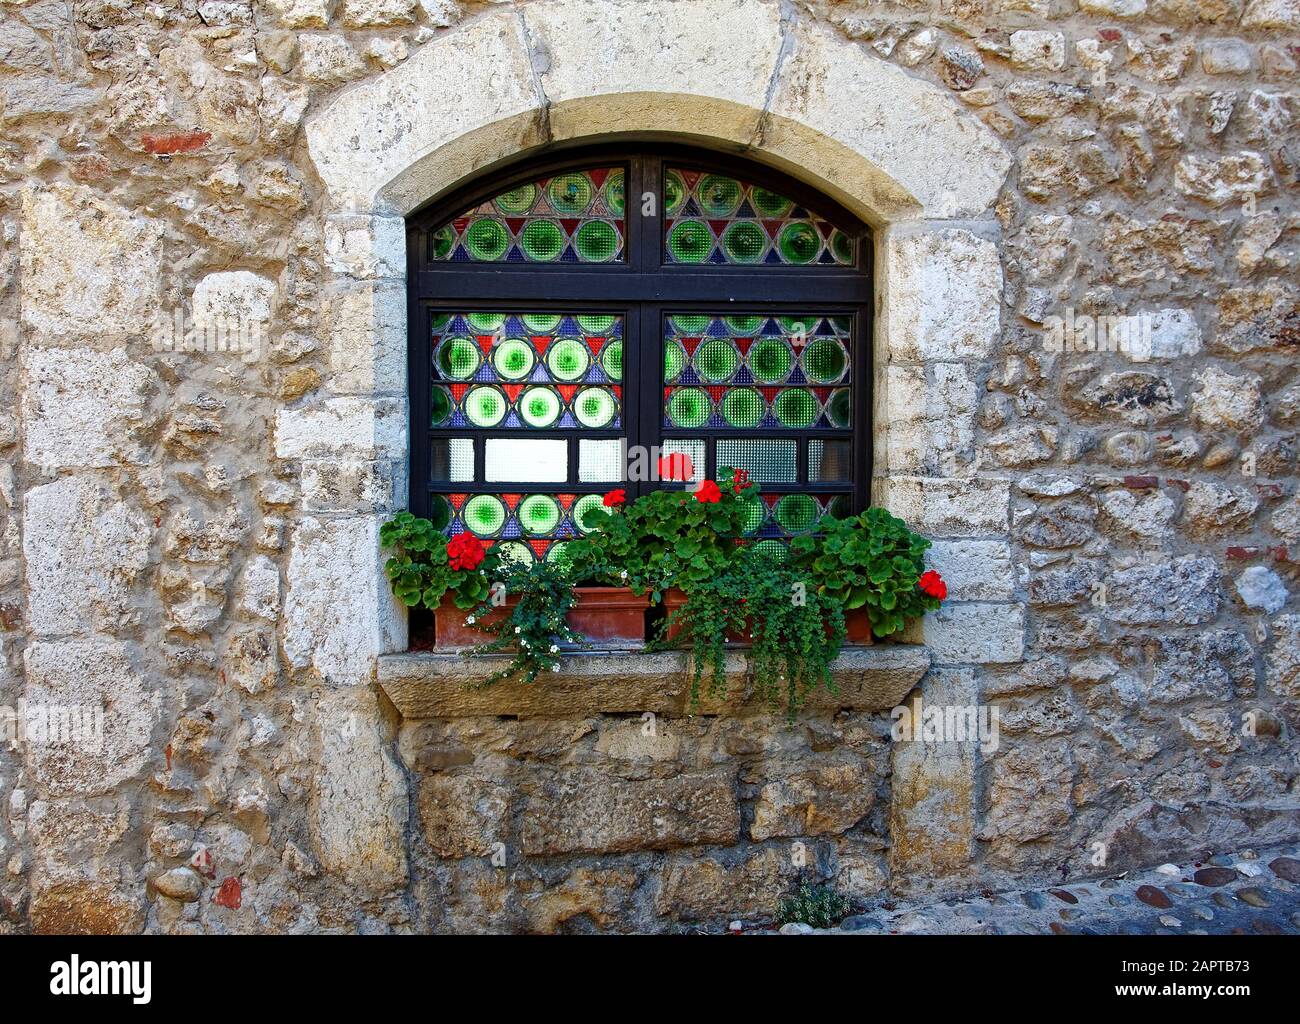 colorful glass window, arched, old stone building, windowsill, potted flowers, contrasting textures, Perouges, France, summer, horizontal Stock Photo